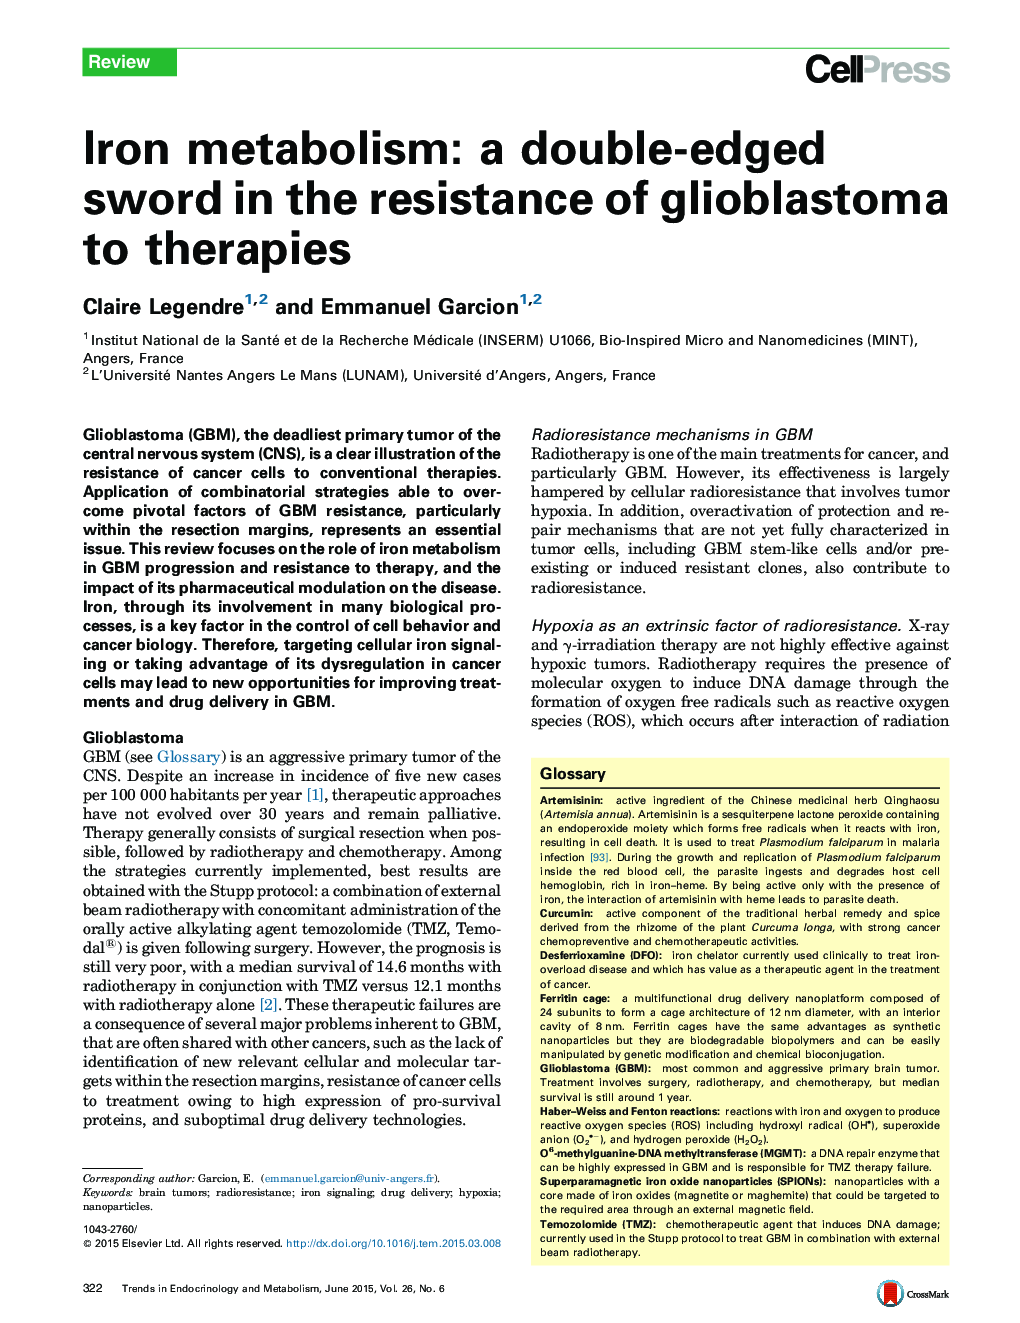 Iron metabolism: a double-edged sword in the resistance of glioblastoma to therapies